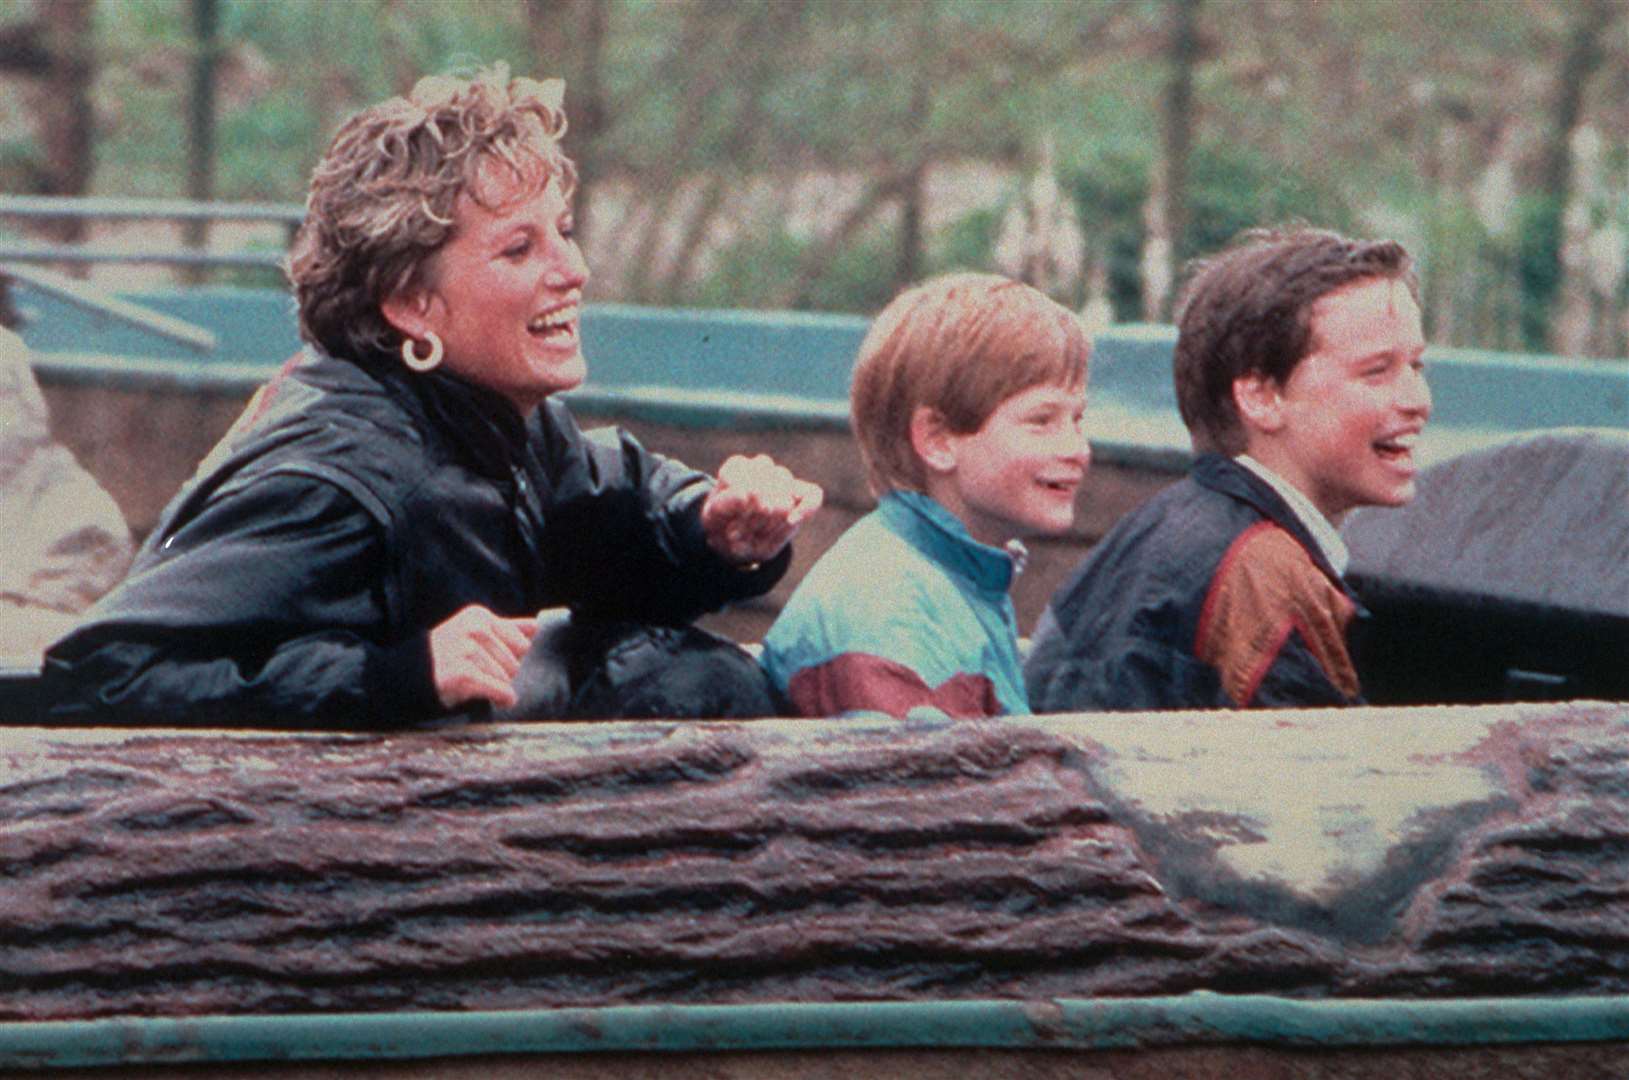 Princess Diana enjoying a day out at Thorpe Park amusement park with her sons Harry (centre) and William (Cliff Kent/PA)